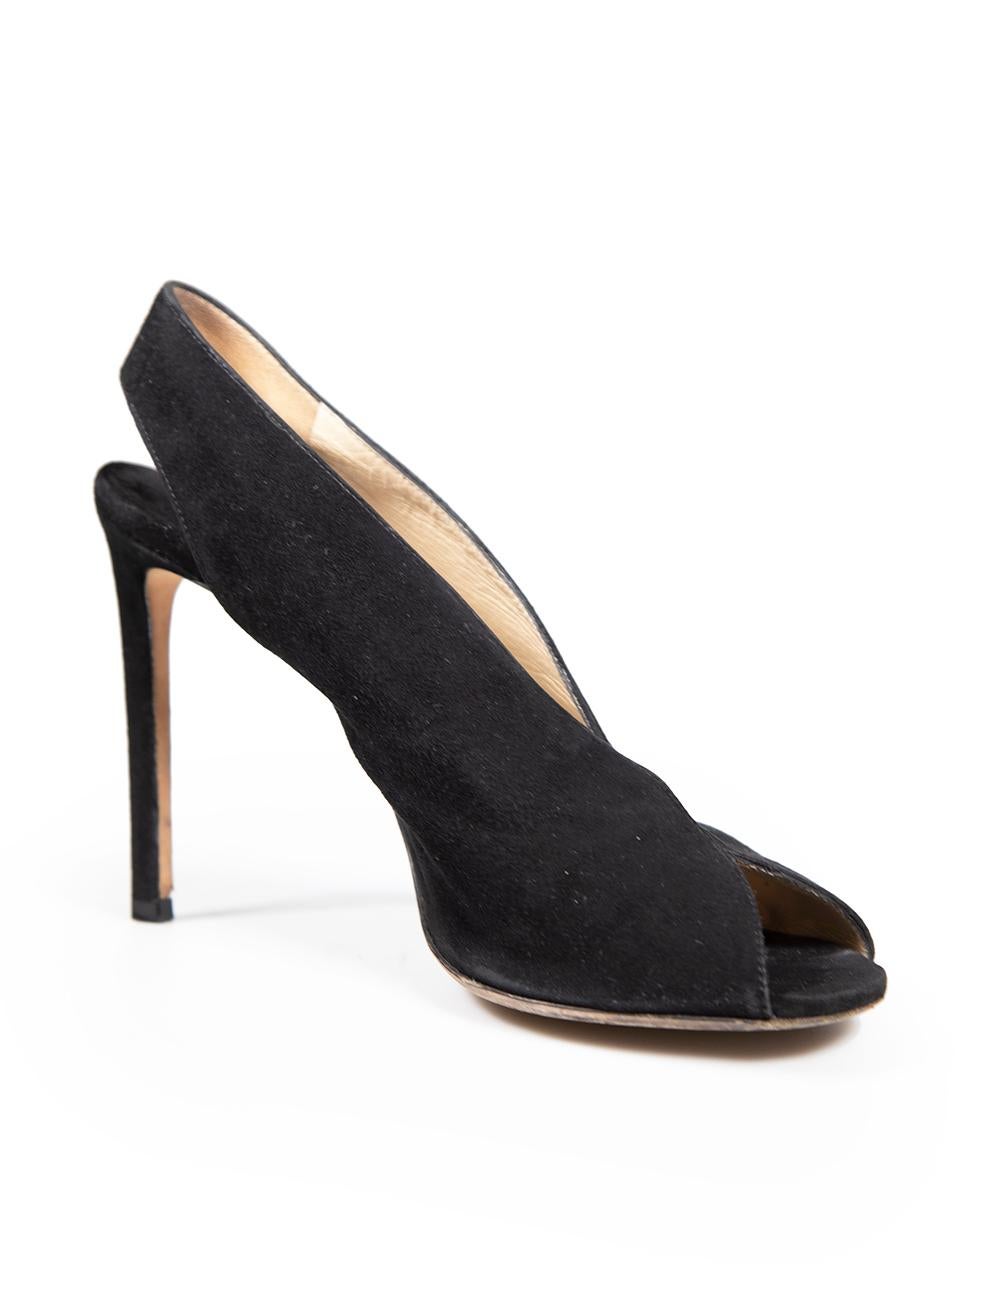 CONDITION is Good. Minor wear to sandals is evident. Light wear to soles and abrasion to suede of top and rear of both shoes on this used Jimmy Choo designer resale item.
 
 
 
 Details
 
 
 Clue model
 
 Black
 
 Suede
 
 Slingback sandals
 
 Open